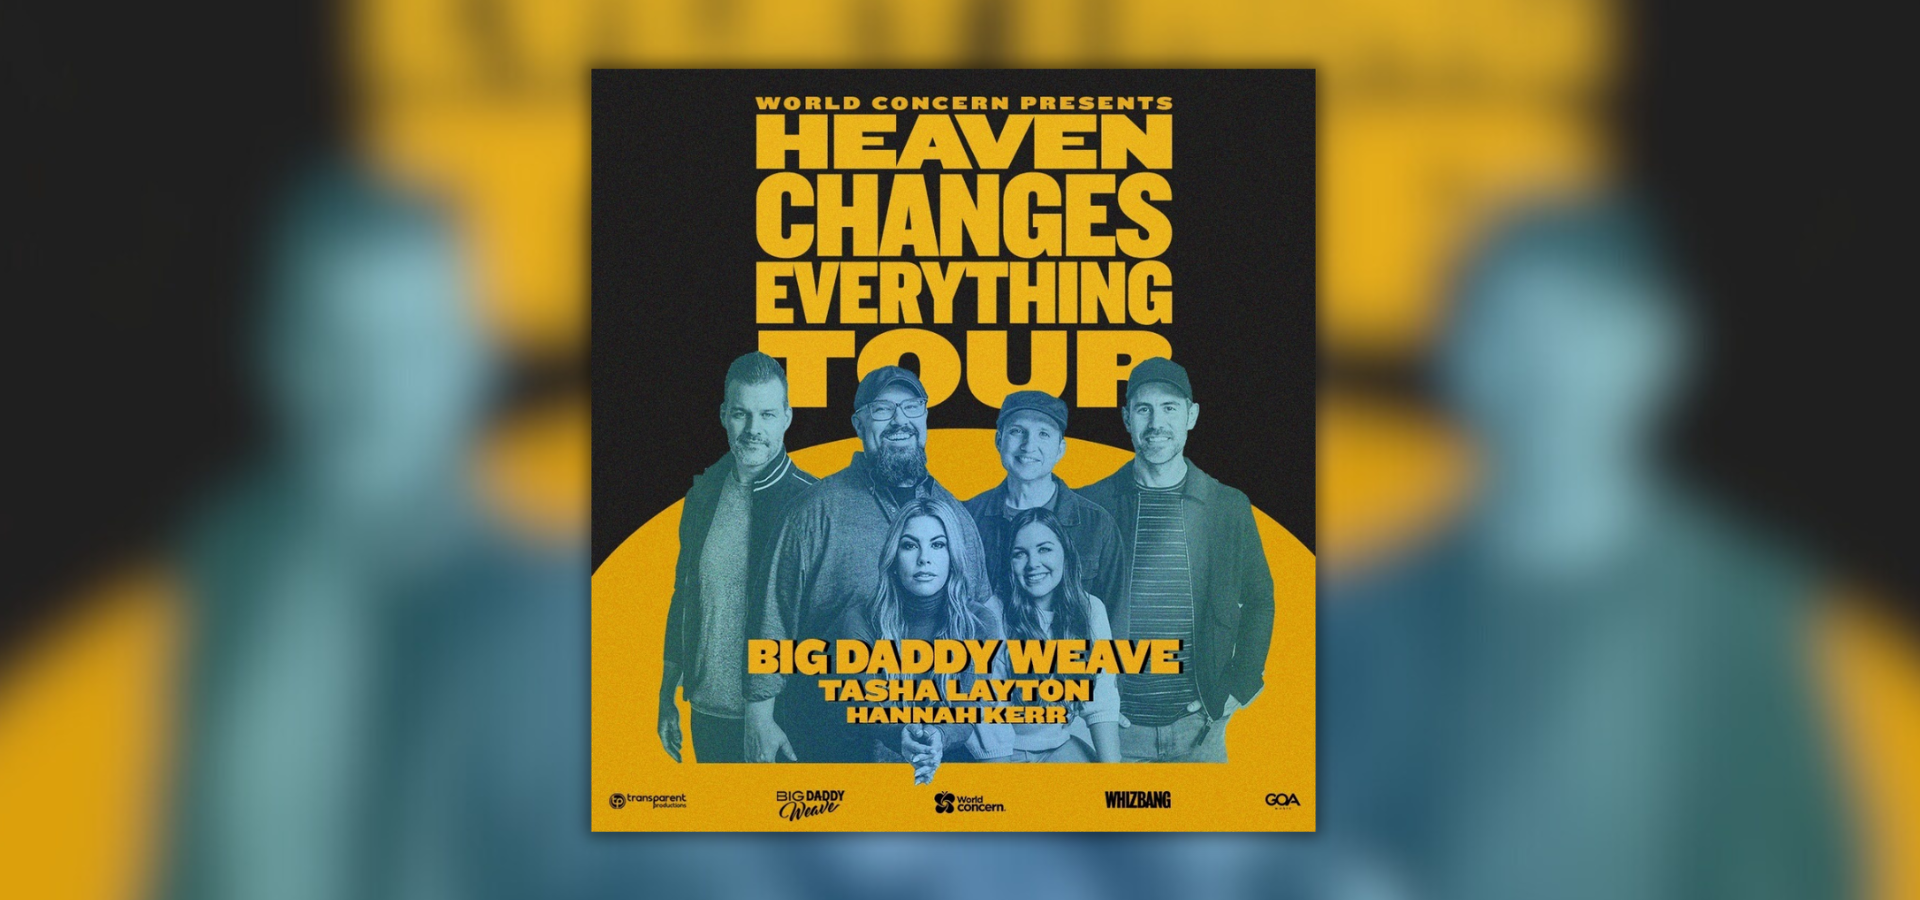 Big Daddy Weave Announces "Heaven Changes Everything Tour" with Tasha